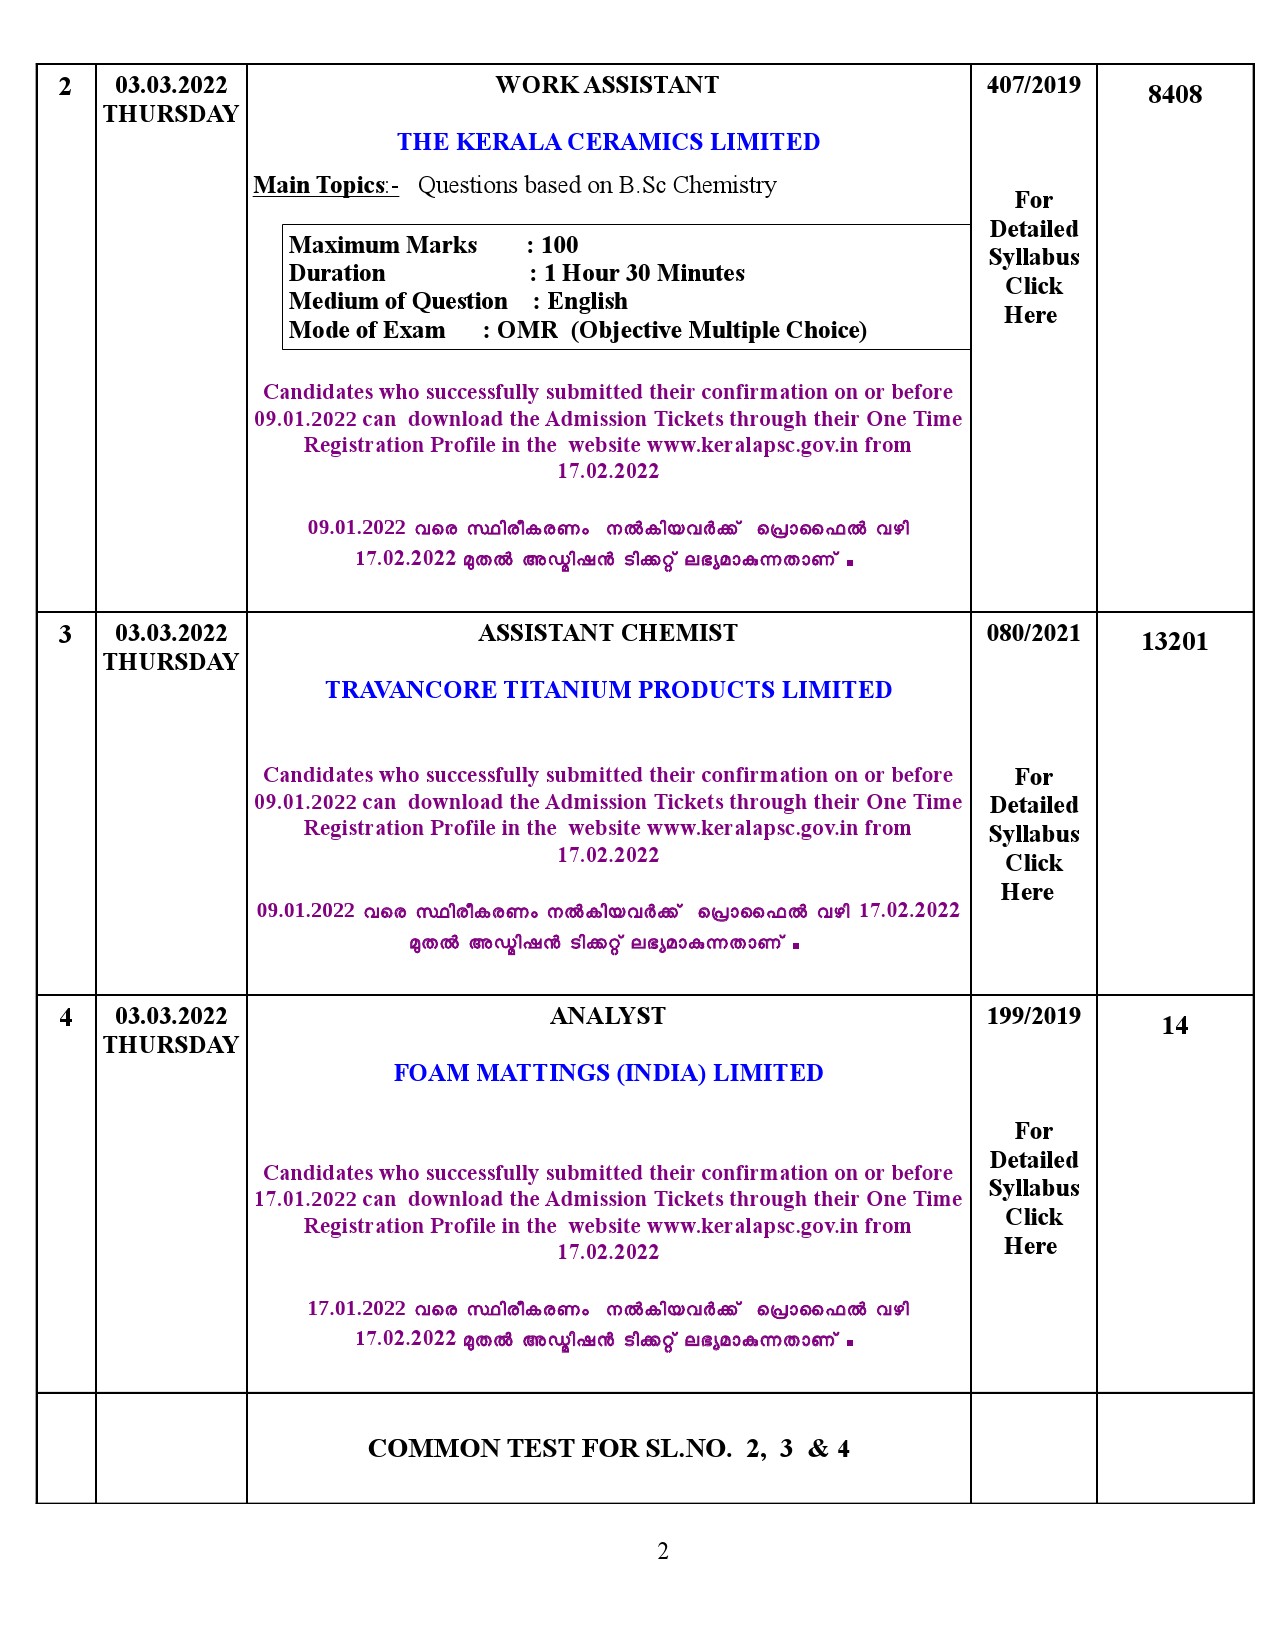 Modified Examination Programme For The Month Of March 2022 - Notification Image 2